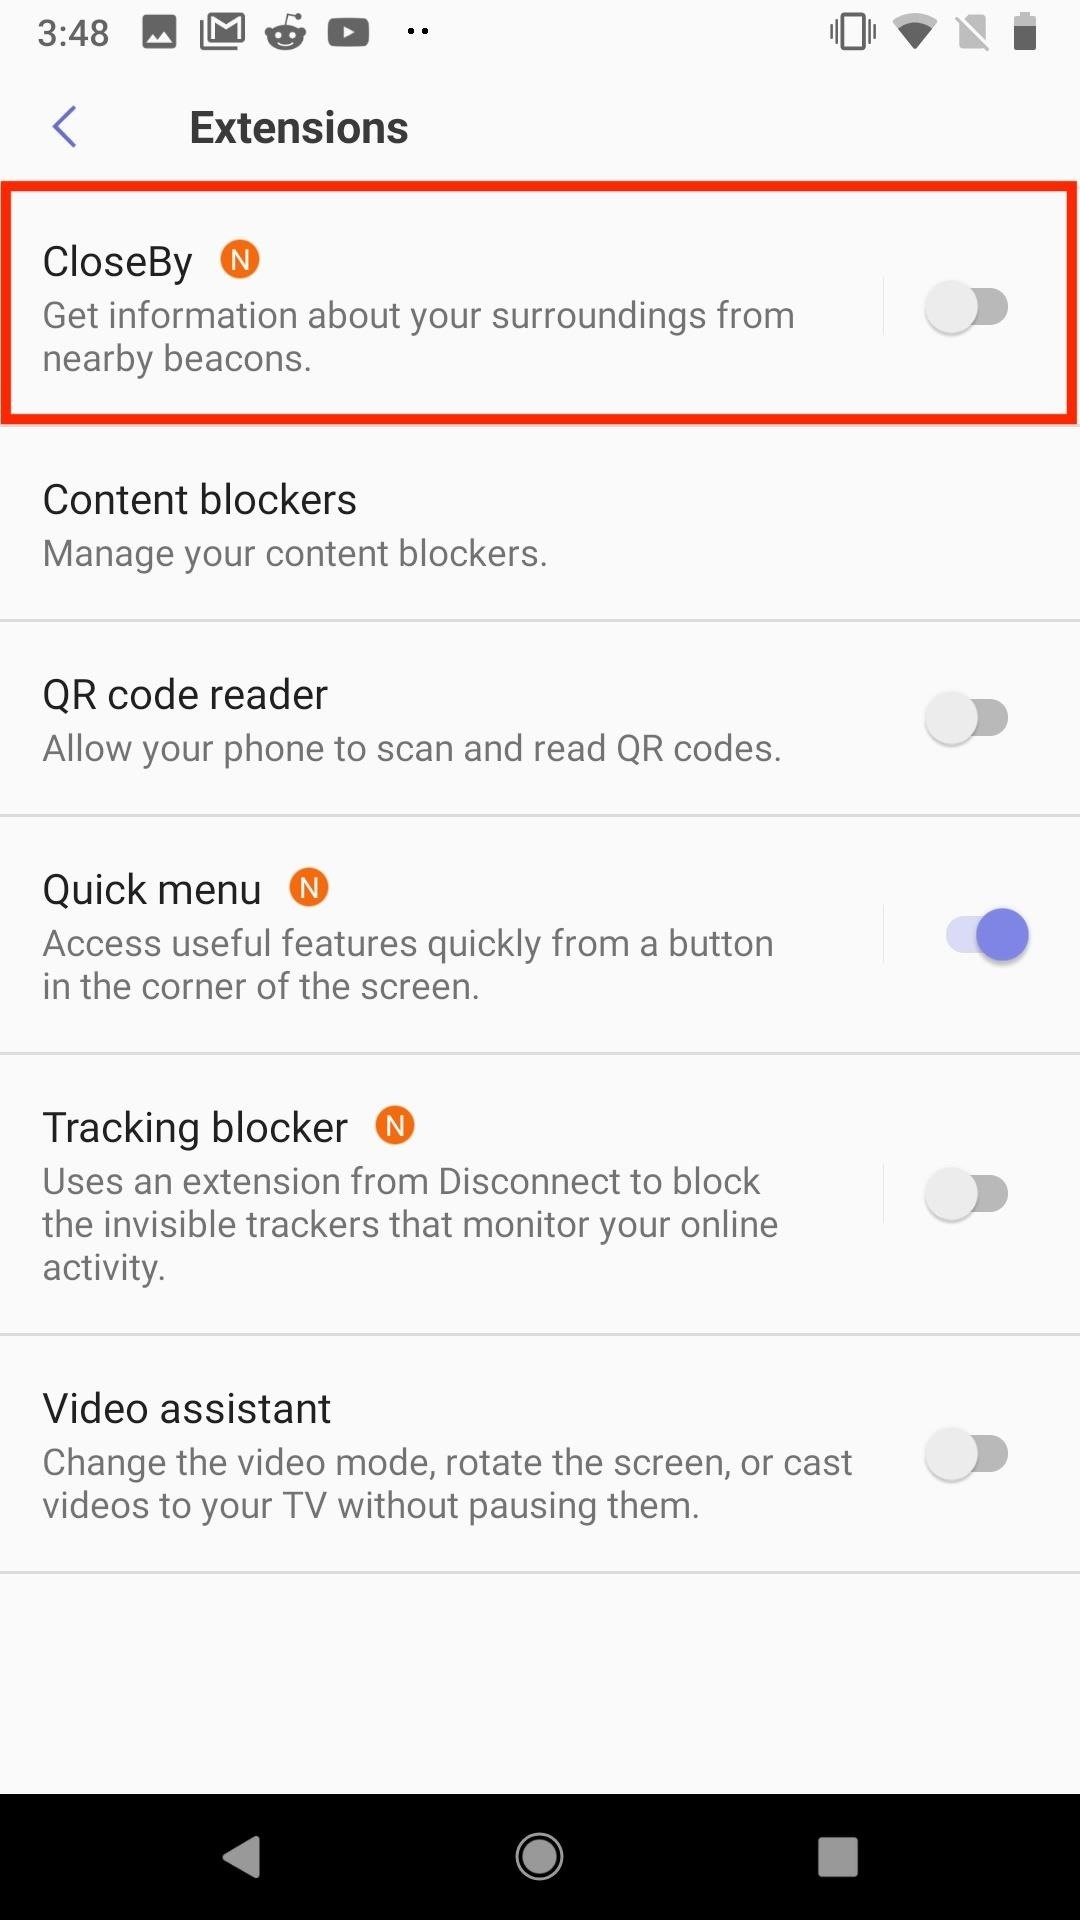 Samsung Internet 101: How to Use Extensions to Block Ads, Scan QR Codes, & More